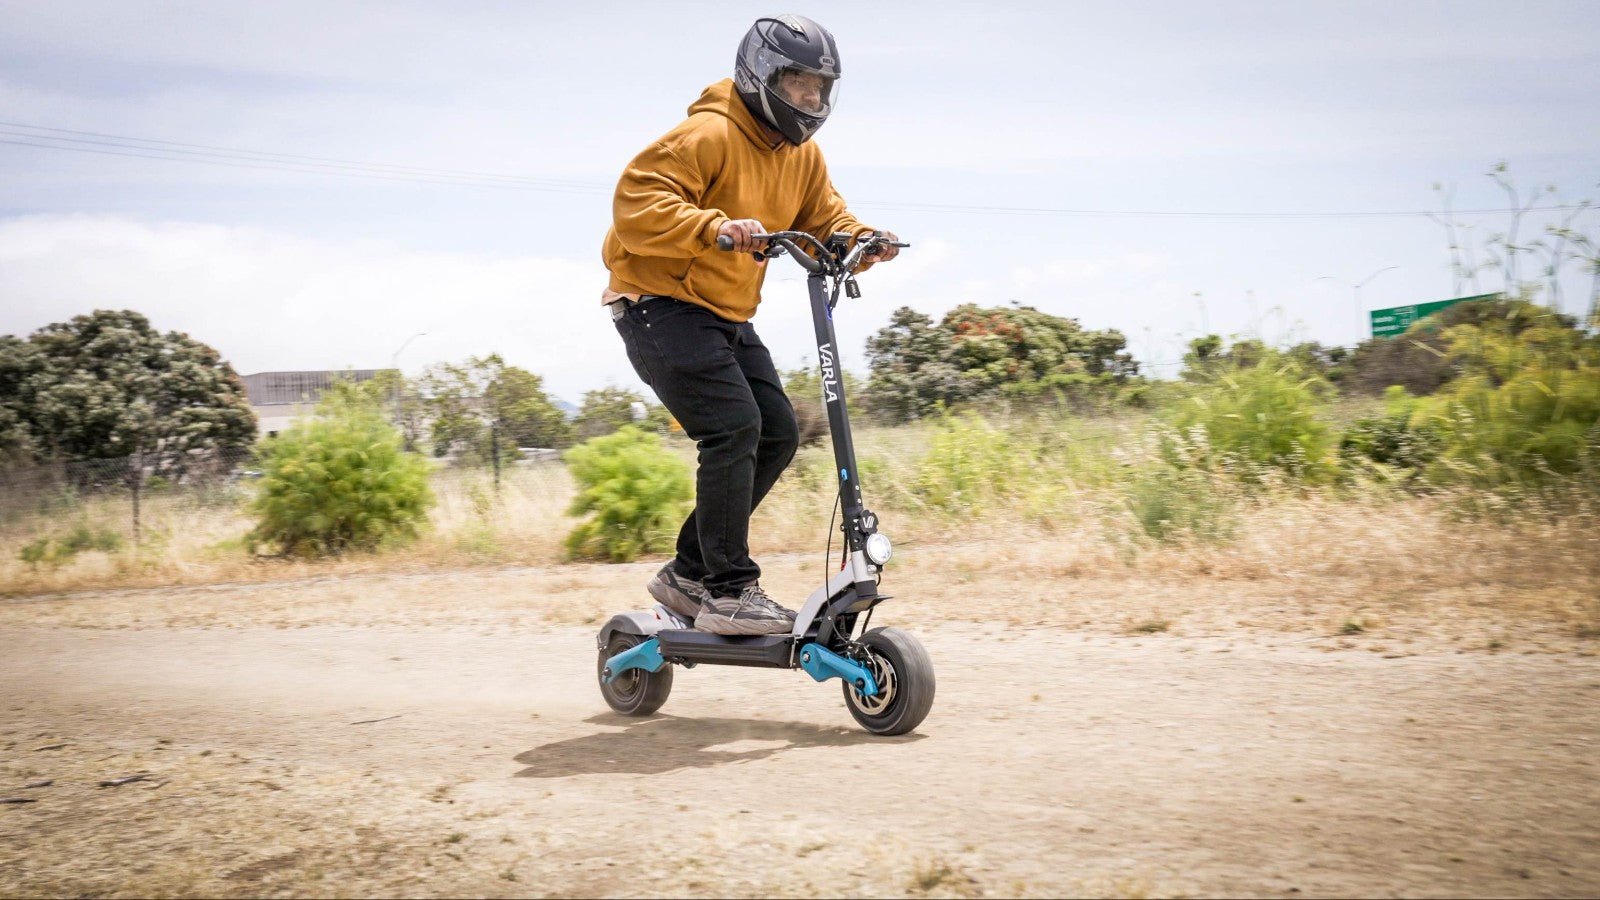 Why Does My Fast Electric Scooter Cut Out When I Accelerate?